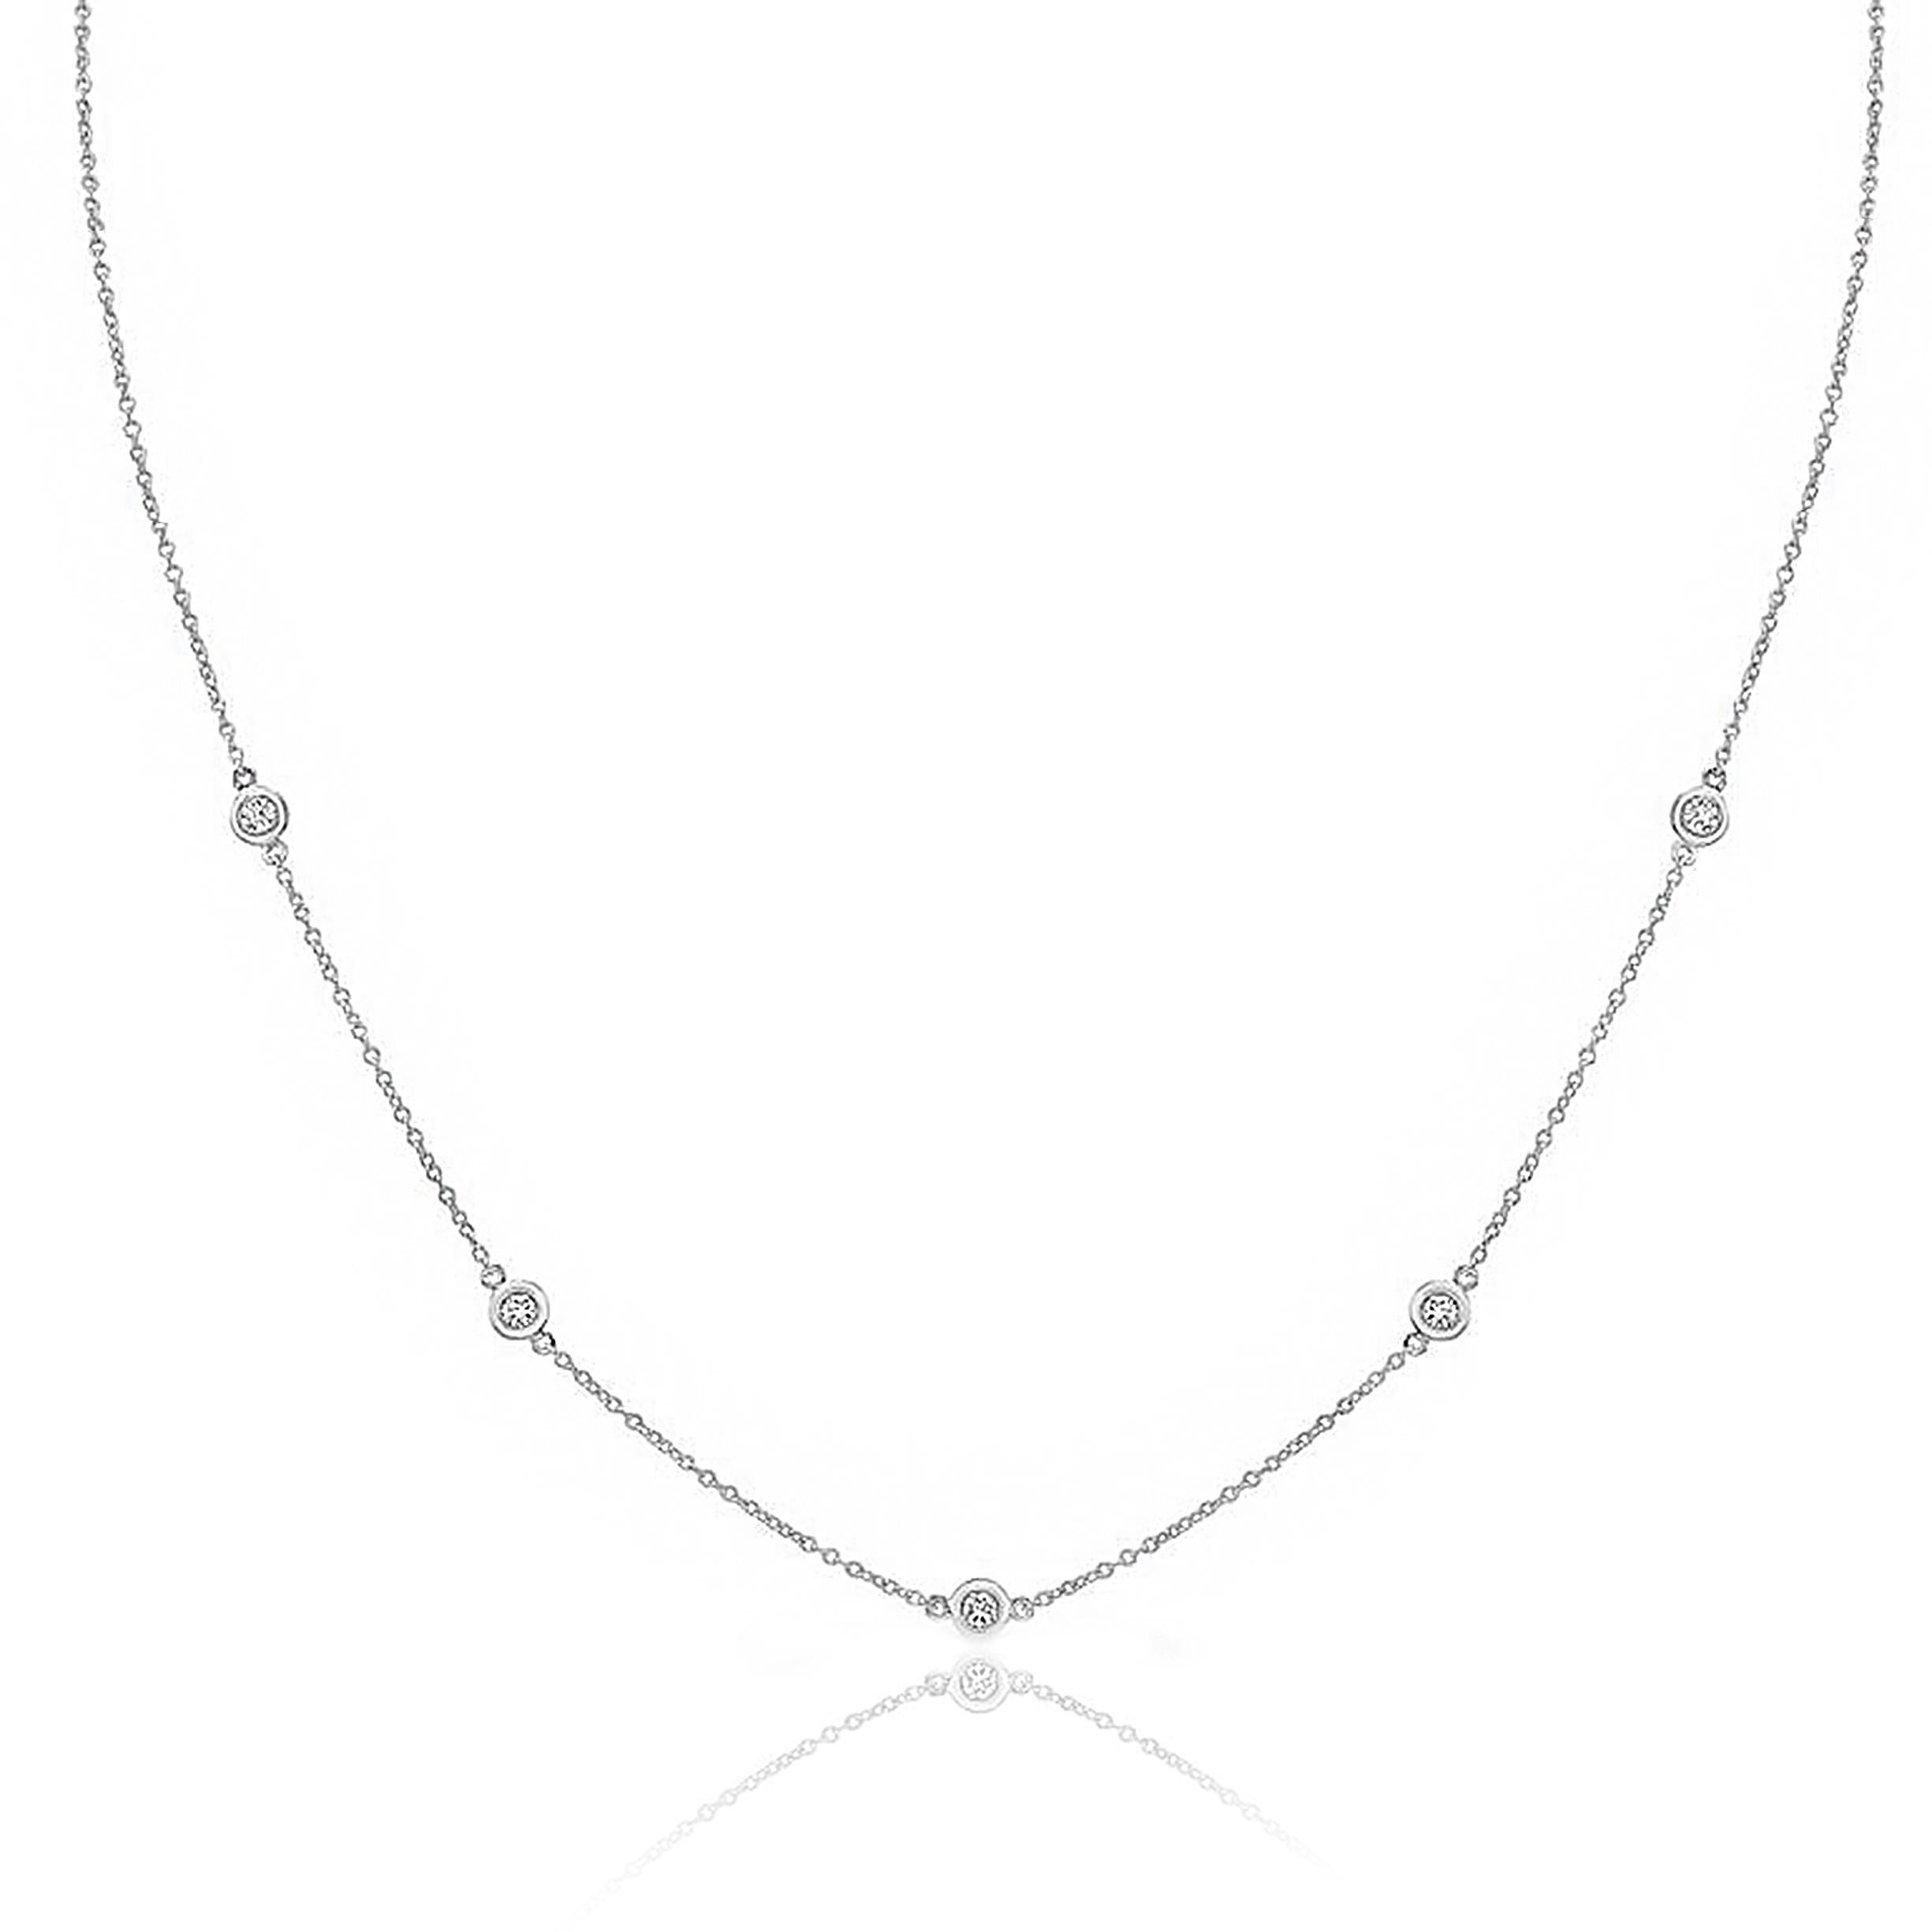 A simple yet classic diamond by-the-yard necklace. 5 pieces of diamonds weigh 0.25 carats in total. 

Style is available in different price ranges. Prices are based on your selection. Please contact us for more information.